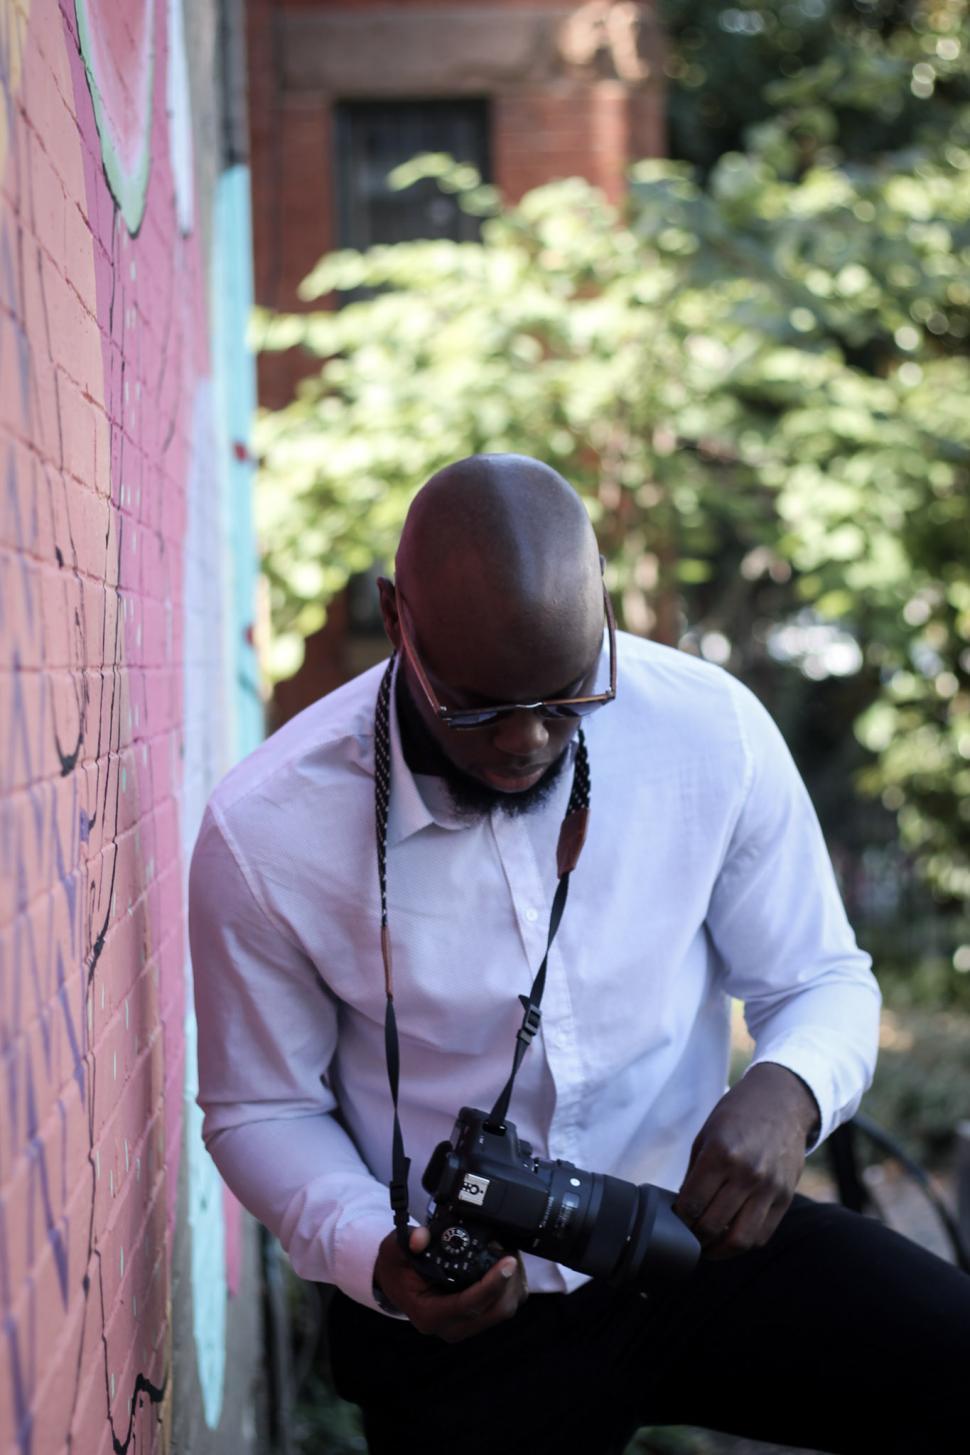 Free Image of Young Man with shaved head, in white shirt holding professional camera - look 